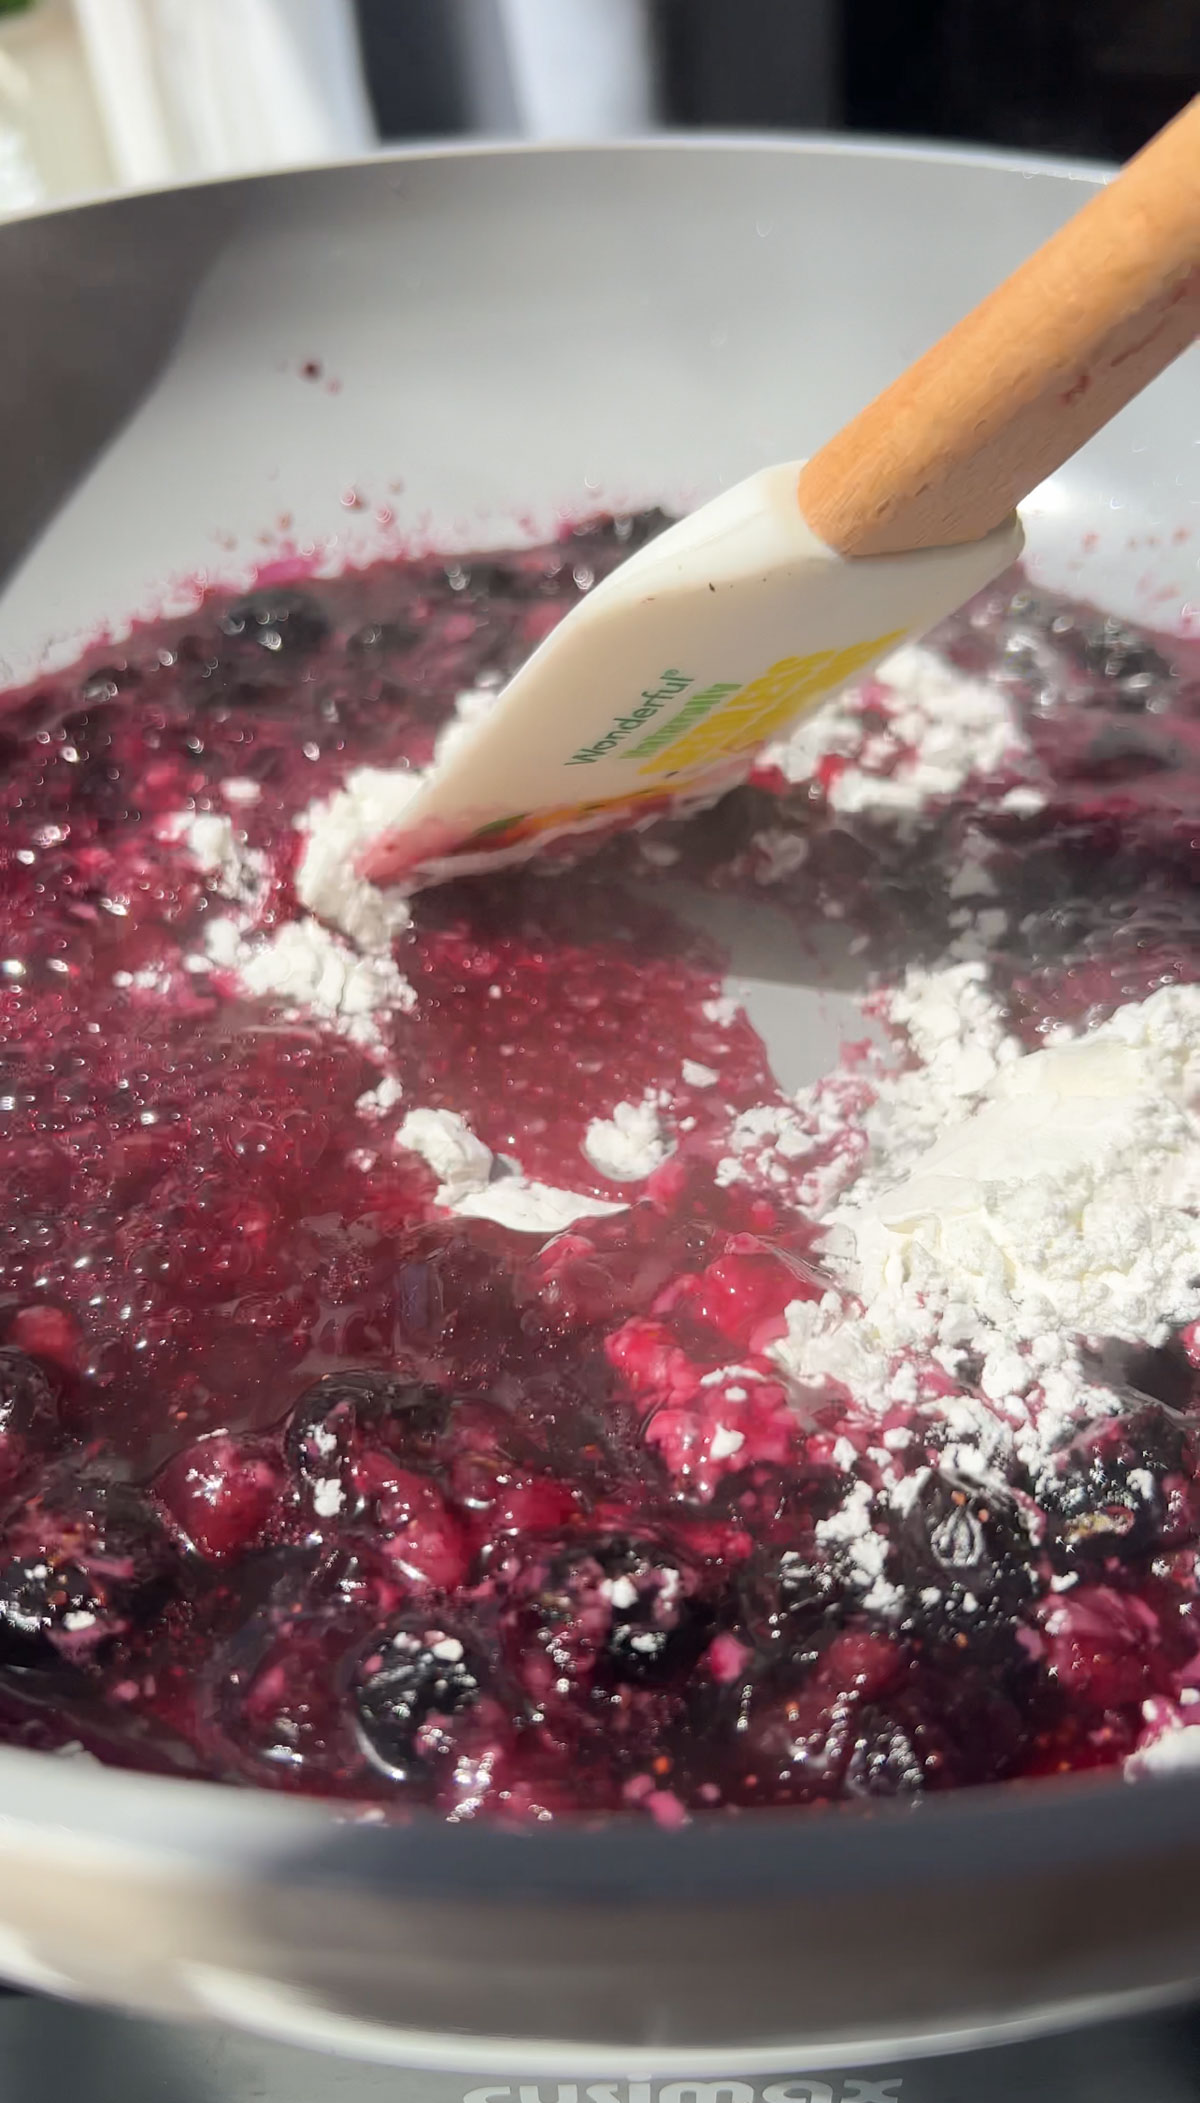 Adding the cornstarch to the blueberry mixture.